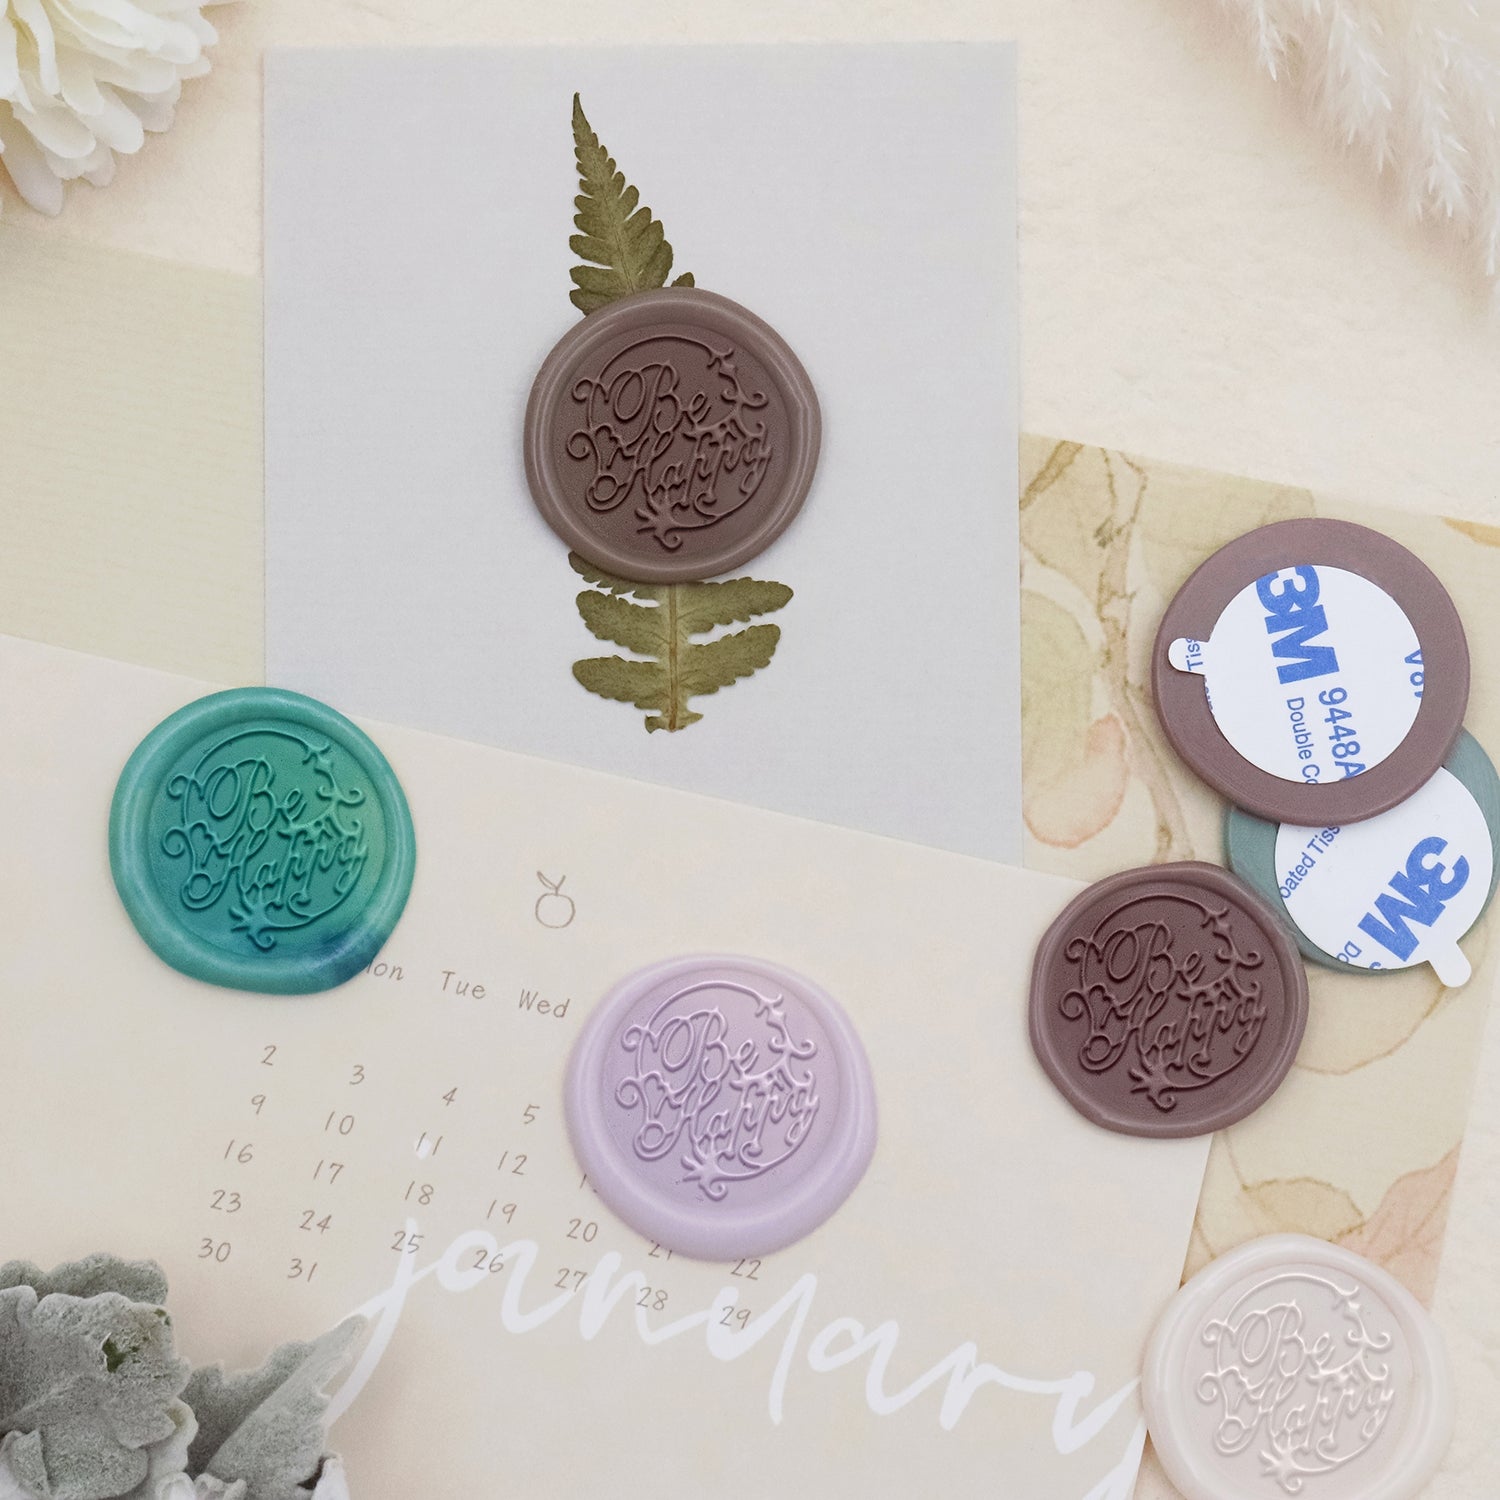 Greeting Self-adhesive Wax Seal Stickers - Be Happy 3